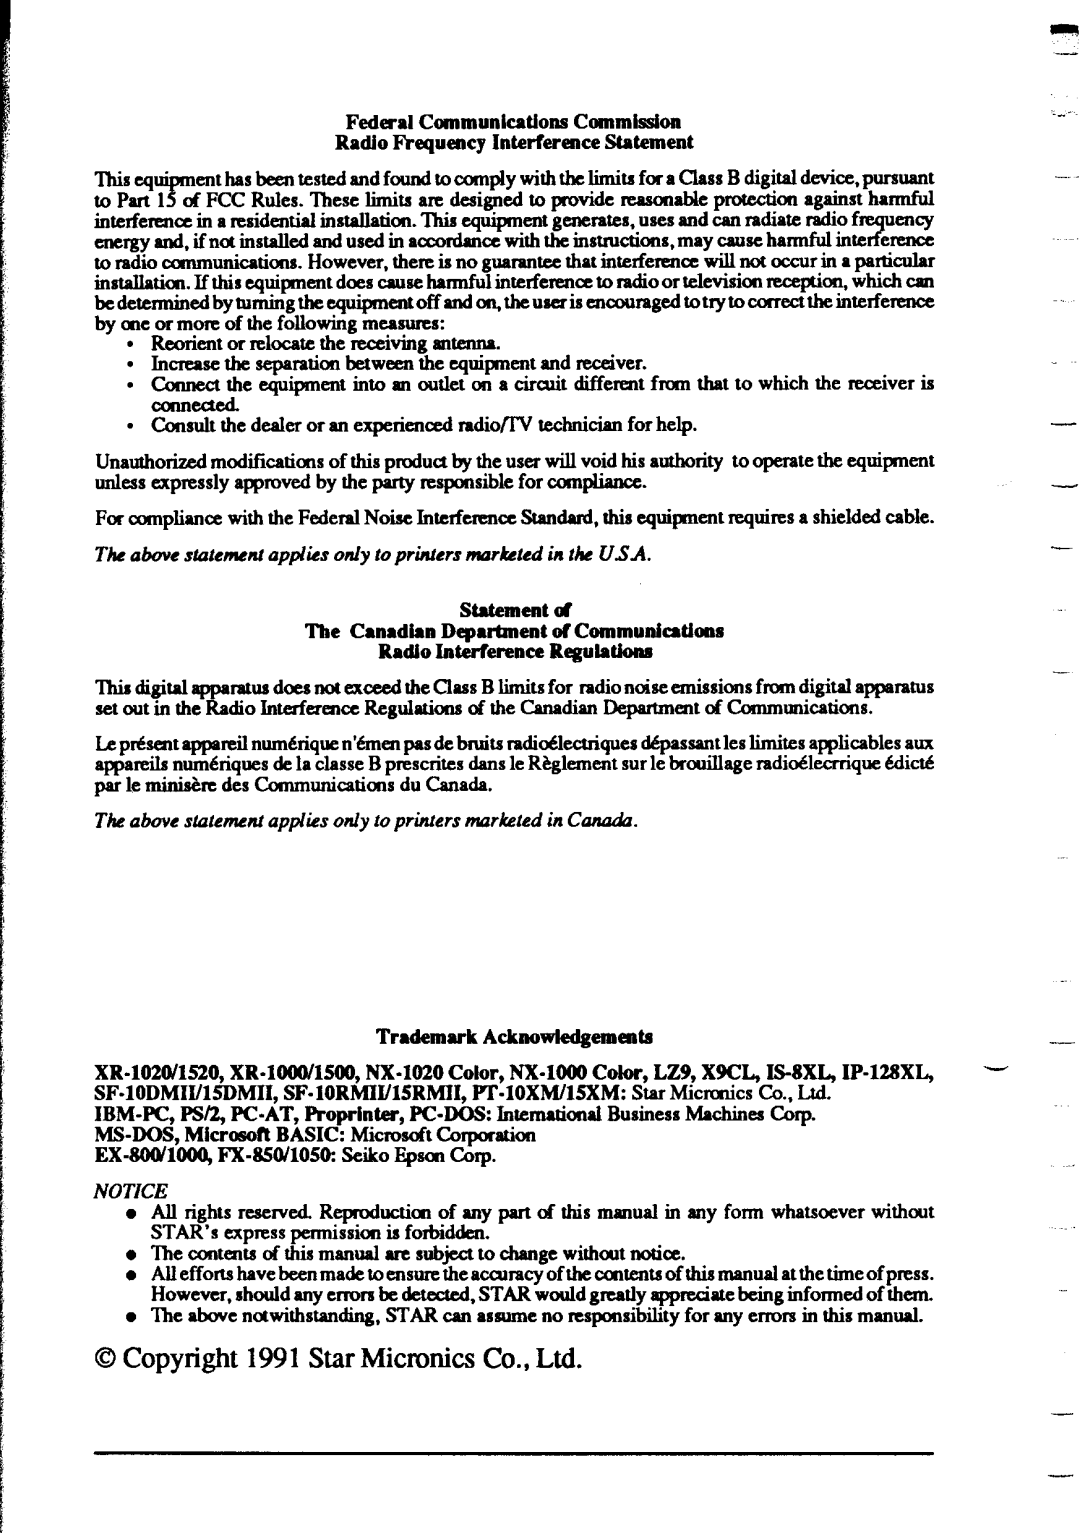 Star Micronics XR-1020 Federal CommunicationsCommission, Tk above statement applies only to printers markted in tk USA 